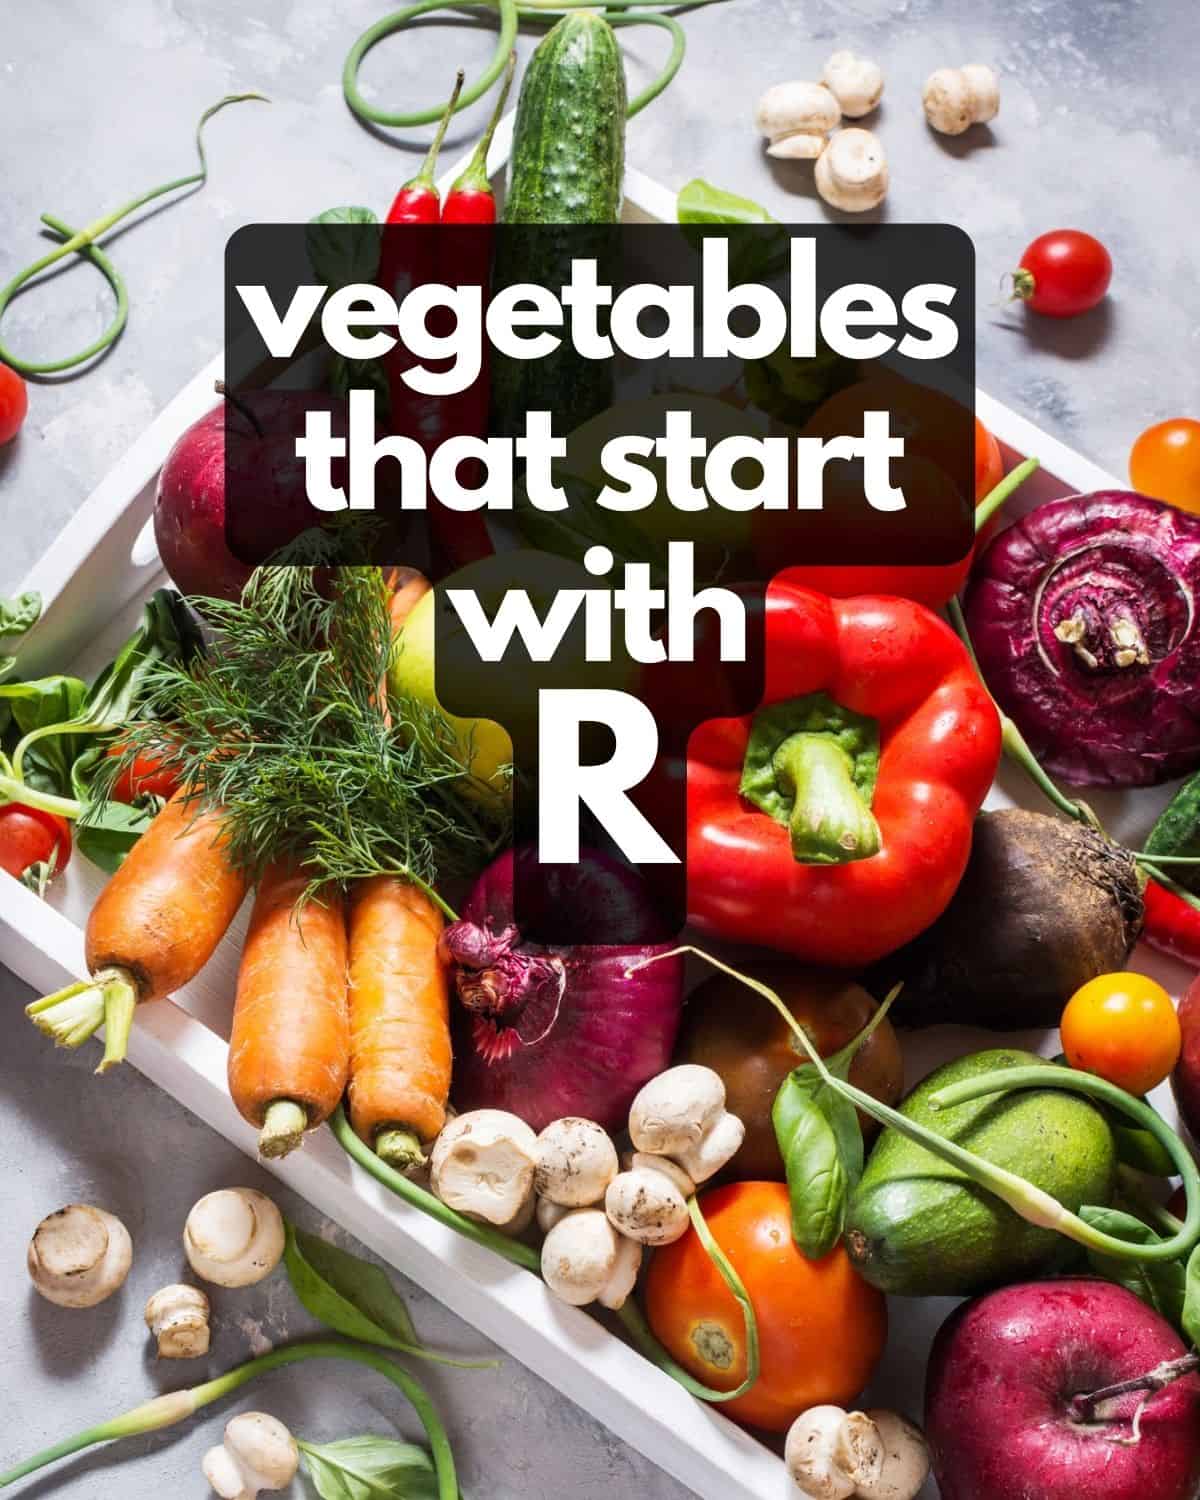 Table of vegetables, plus text: Vegetables that start with R.